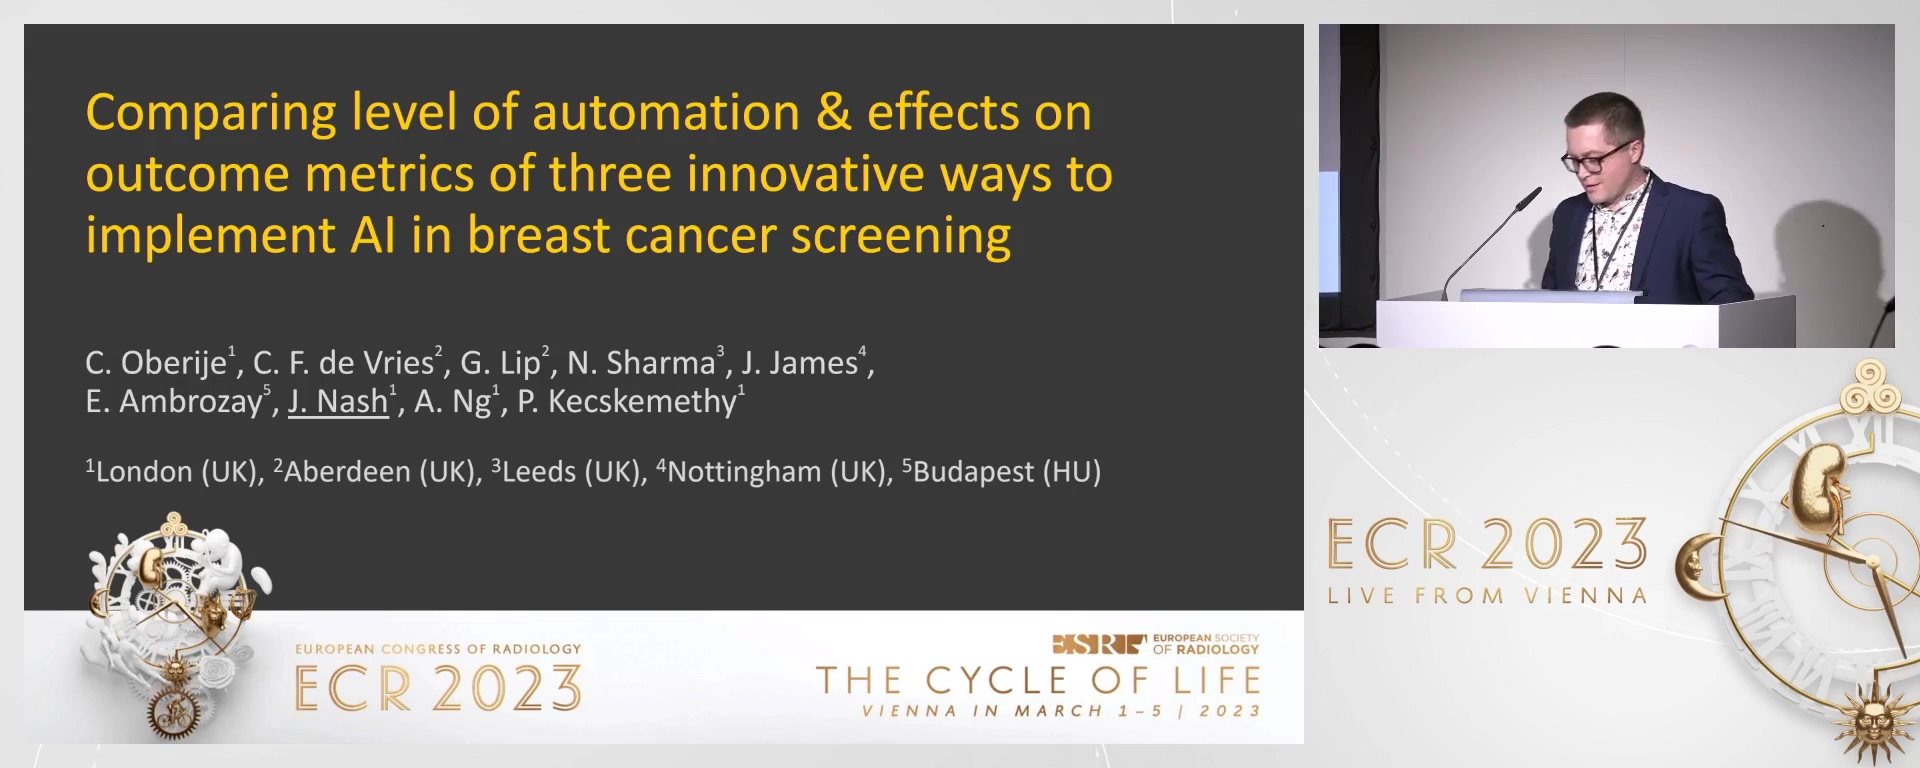 Comparing level of automation and effects on outcome metrics of three innovative ways to implement AI in breast cancer screening - Jonathan Nash, Rowlands Castle / UK